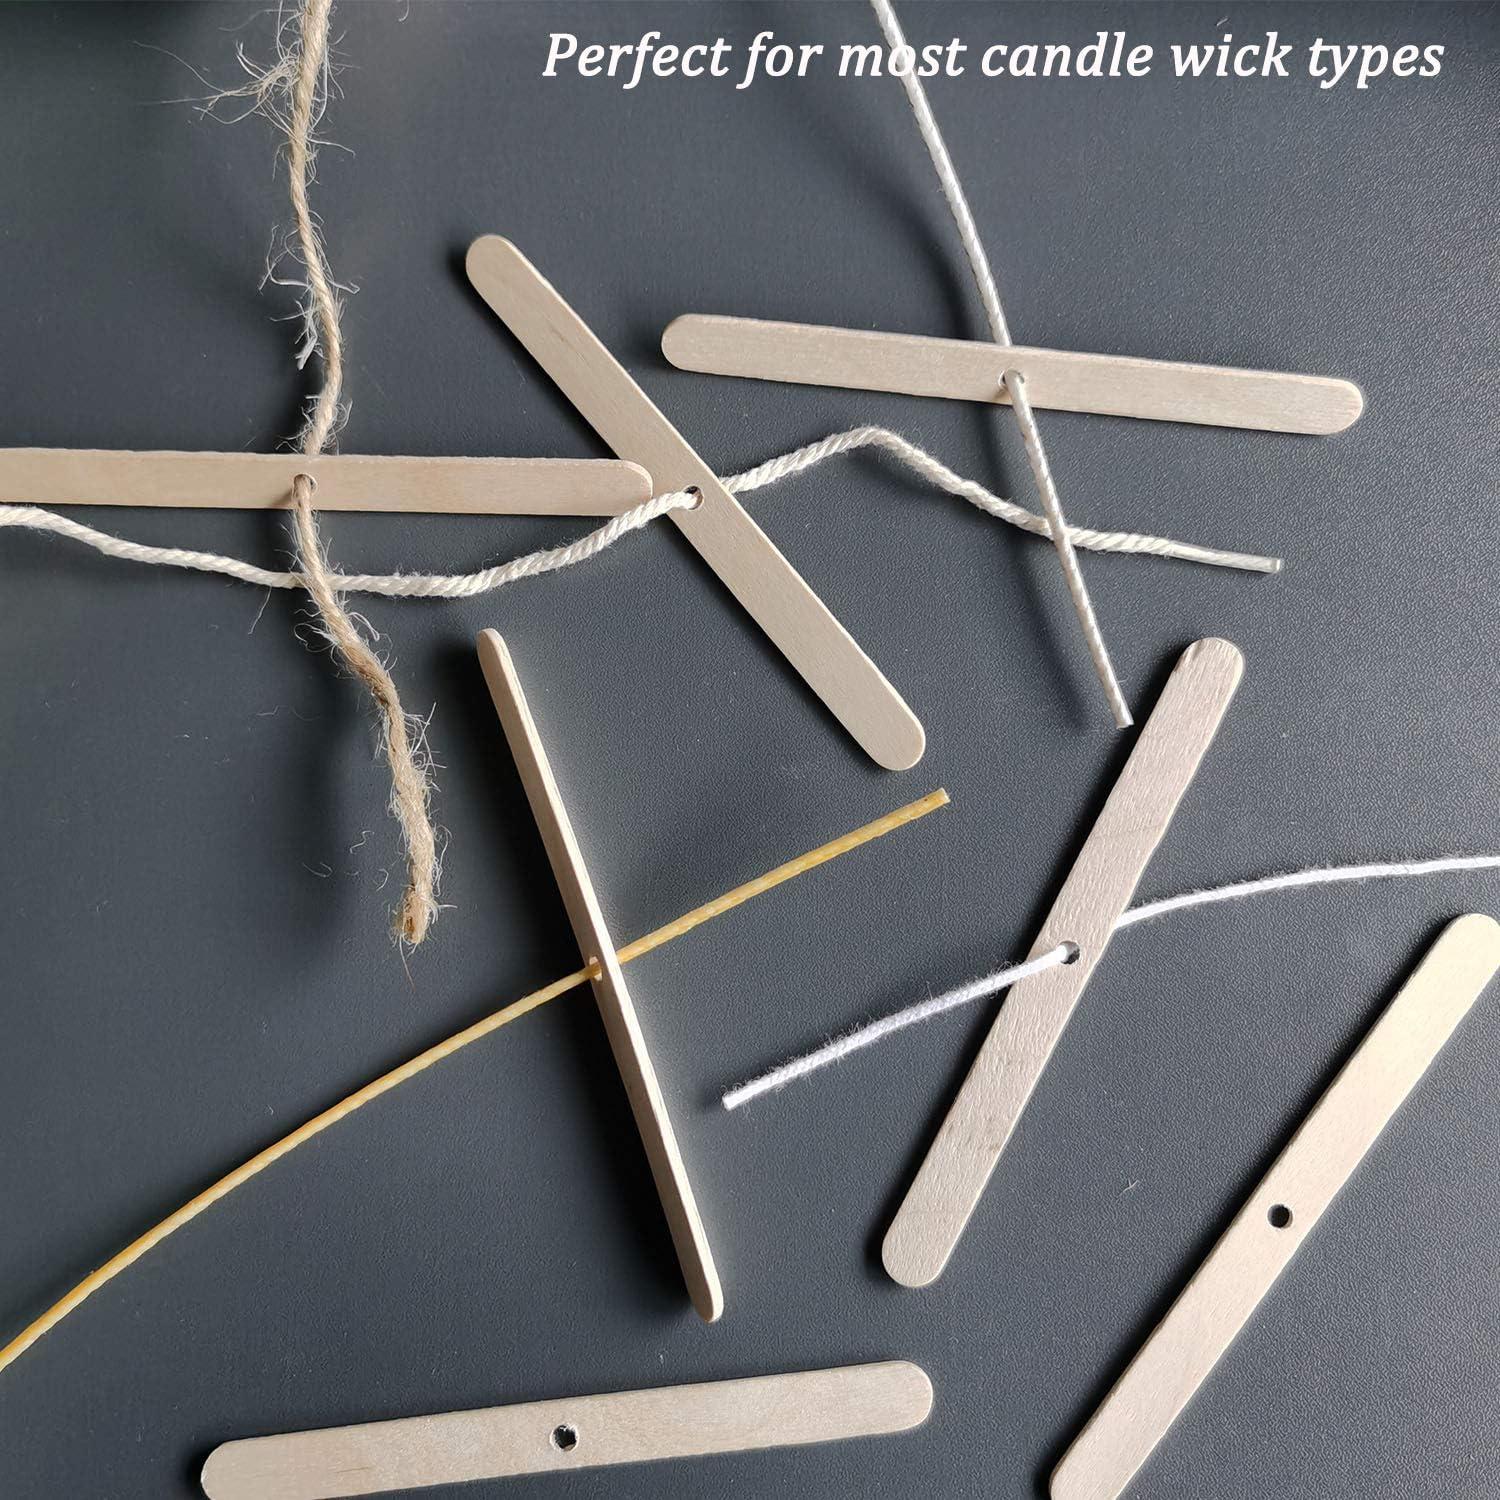 MILIVIXAY 100PCS 10 inch Candle Wicks with 100 Metal Tabs, 100PCS Candle  Wick Stickers and 6PCS Wooden Candle Wick Holders - Wicks Coated with